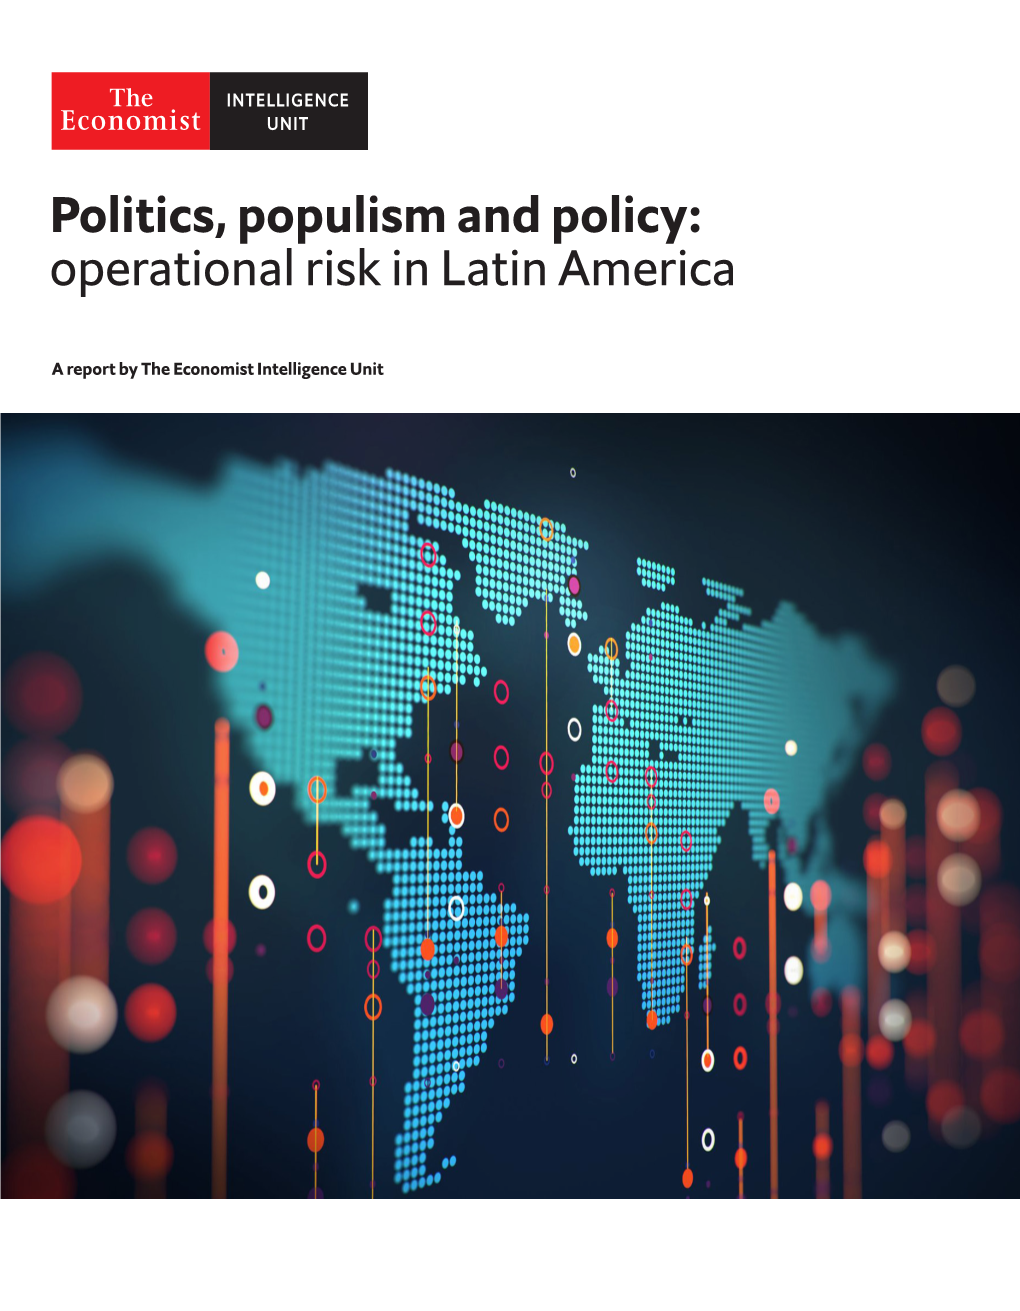 Politics, Populism and Policy: Operational Risk in Latin America